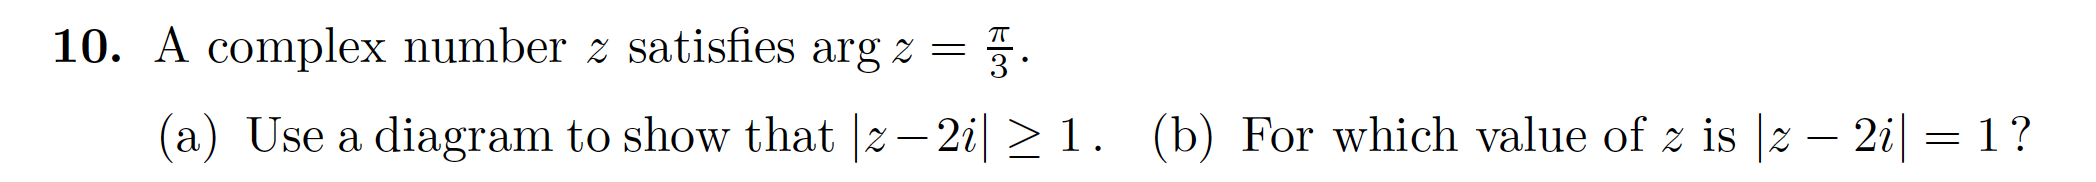 10. A complex number z satisfies arg 2
(a) Use a diagram to show that z- 2i
(b) For which value of z is |z - 2i= 1?
1.
